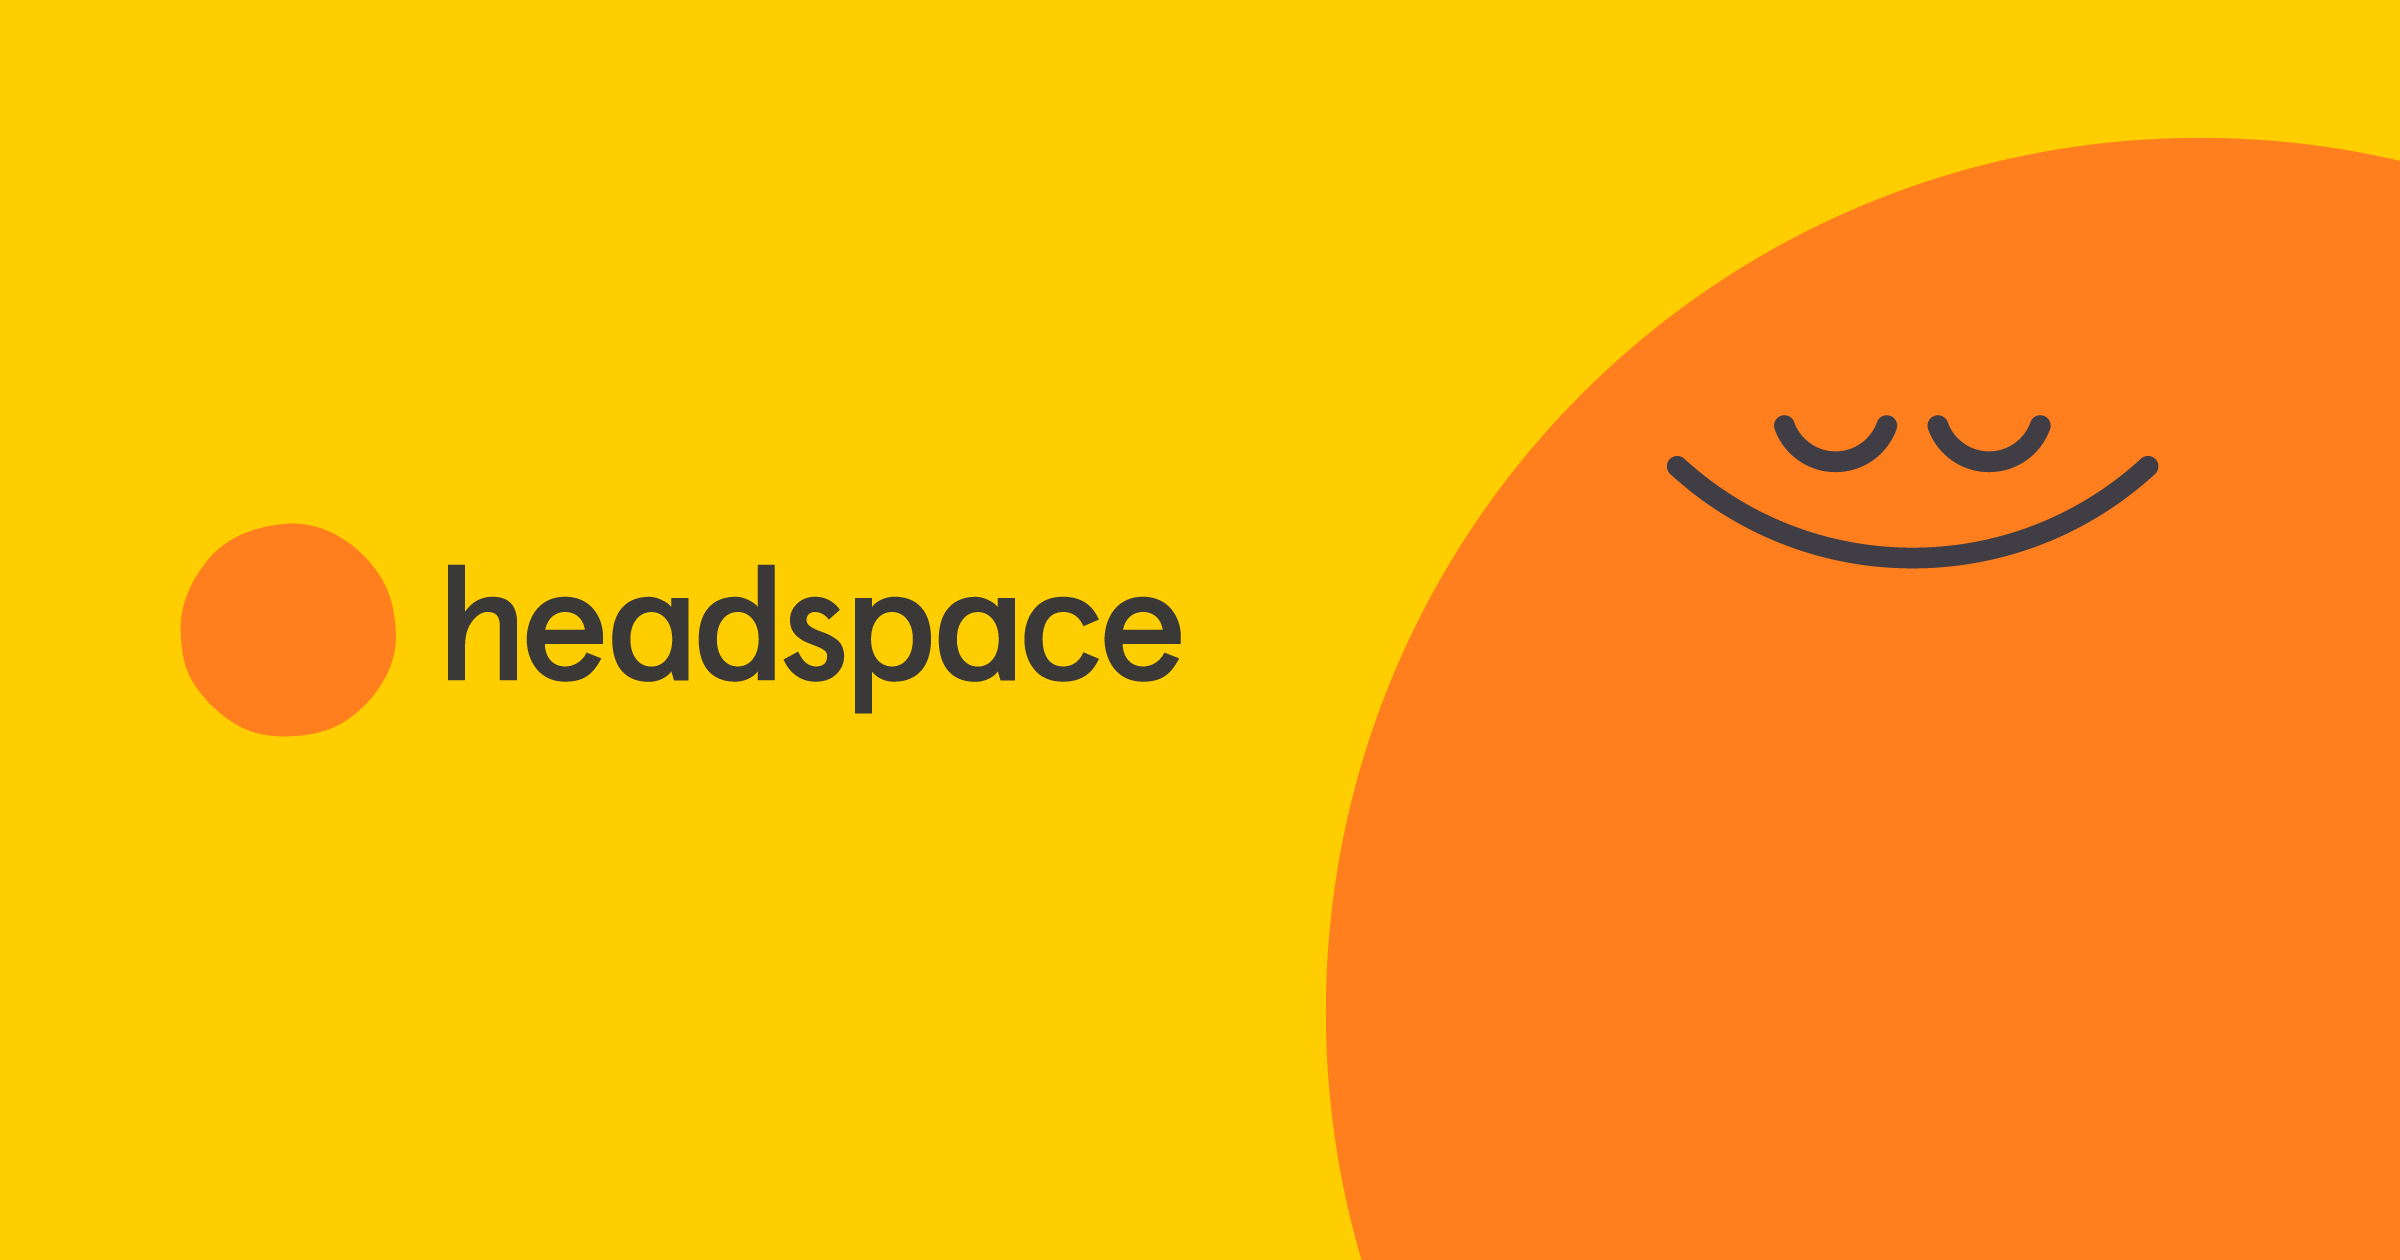 Headspace Business Model